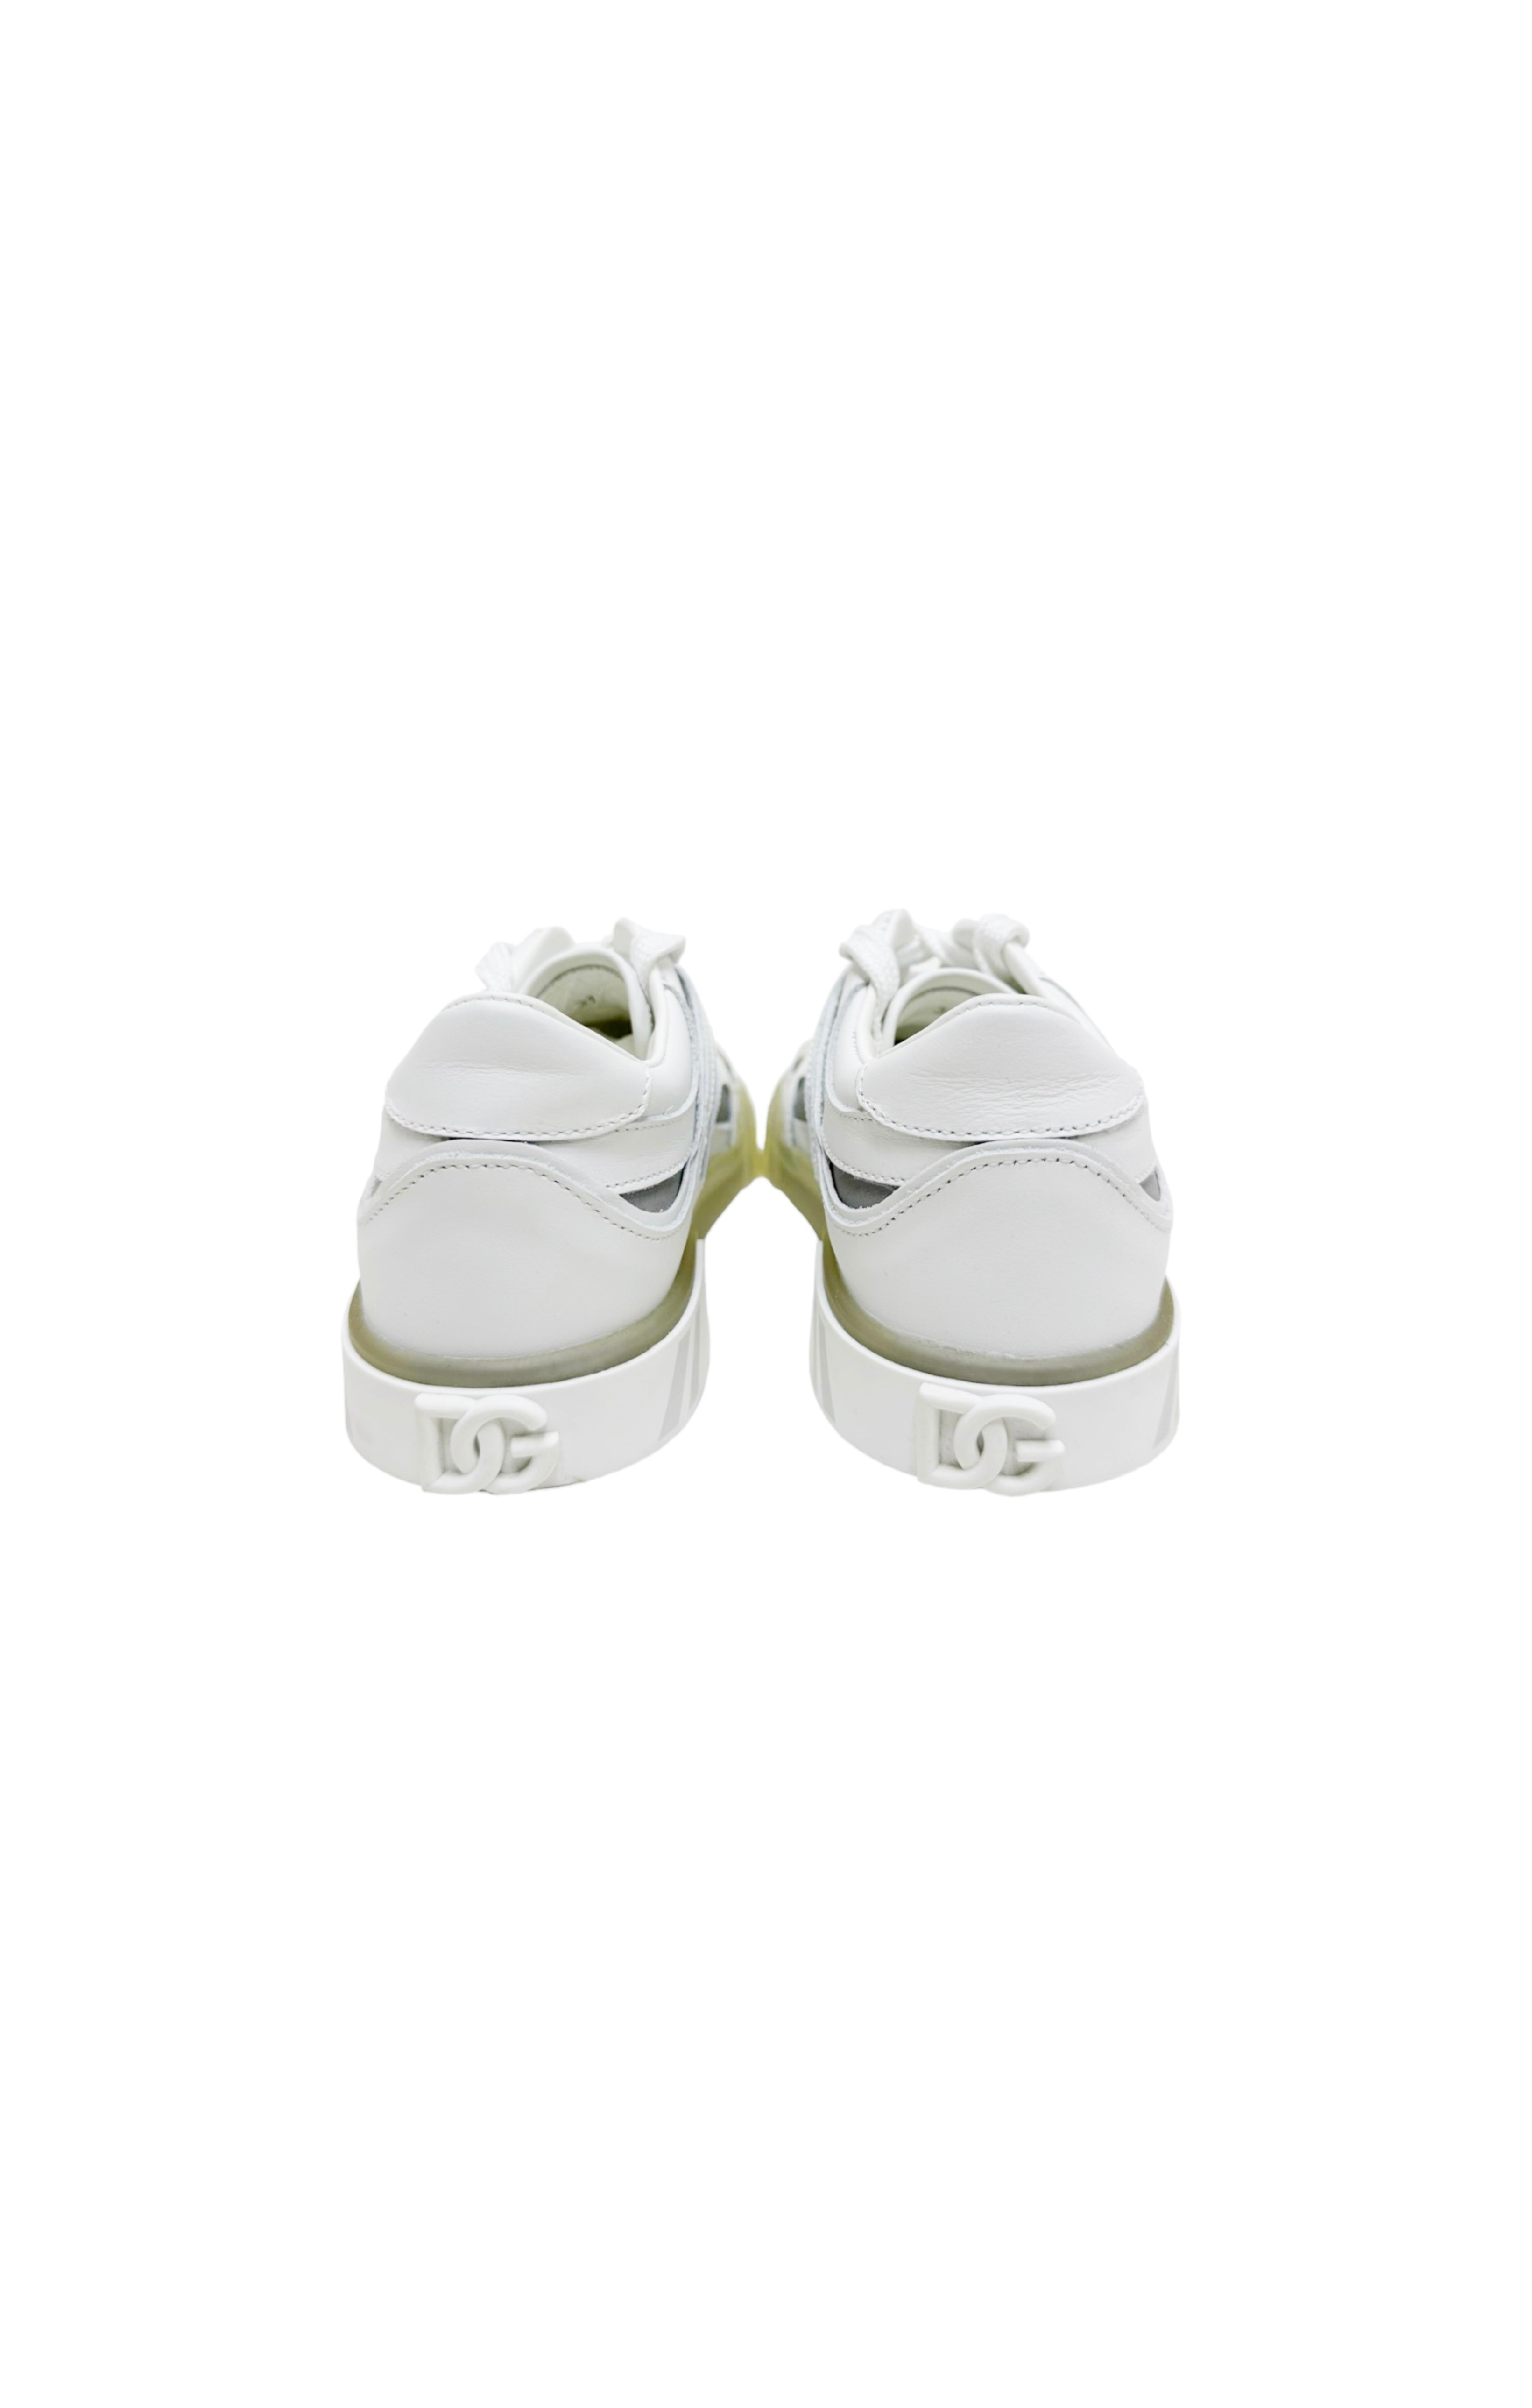 DOLCE & GABBANA (RARE)  Sneakers  Size: EUR 31 / Fits like Toddler US 13